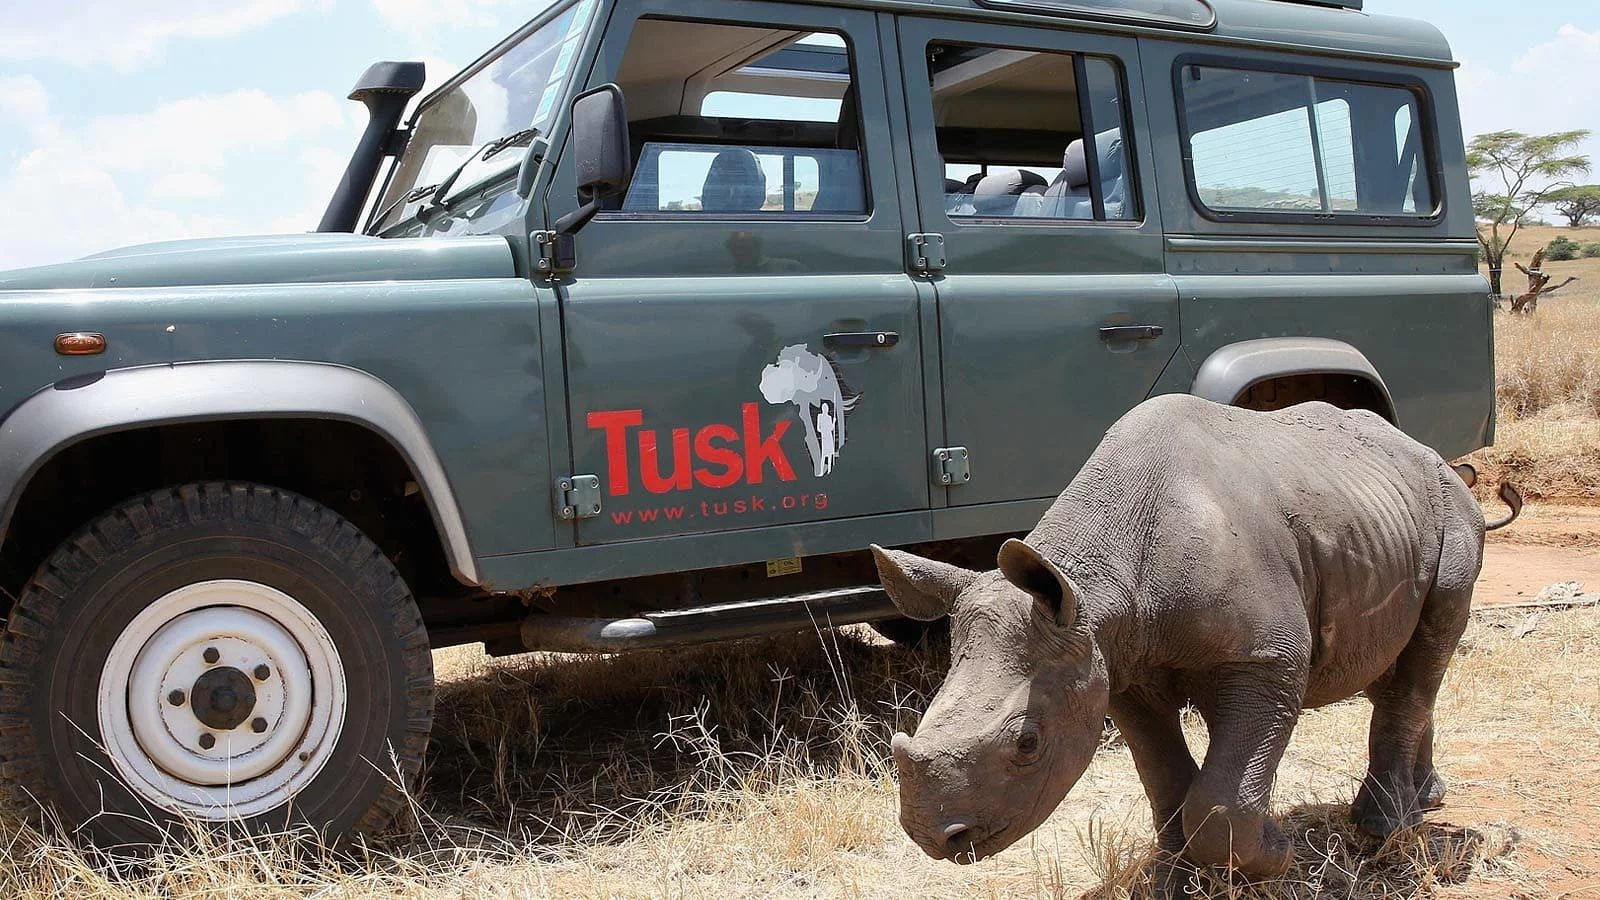 LAND ROVER AND TUSK – THE PARTNERSHIP